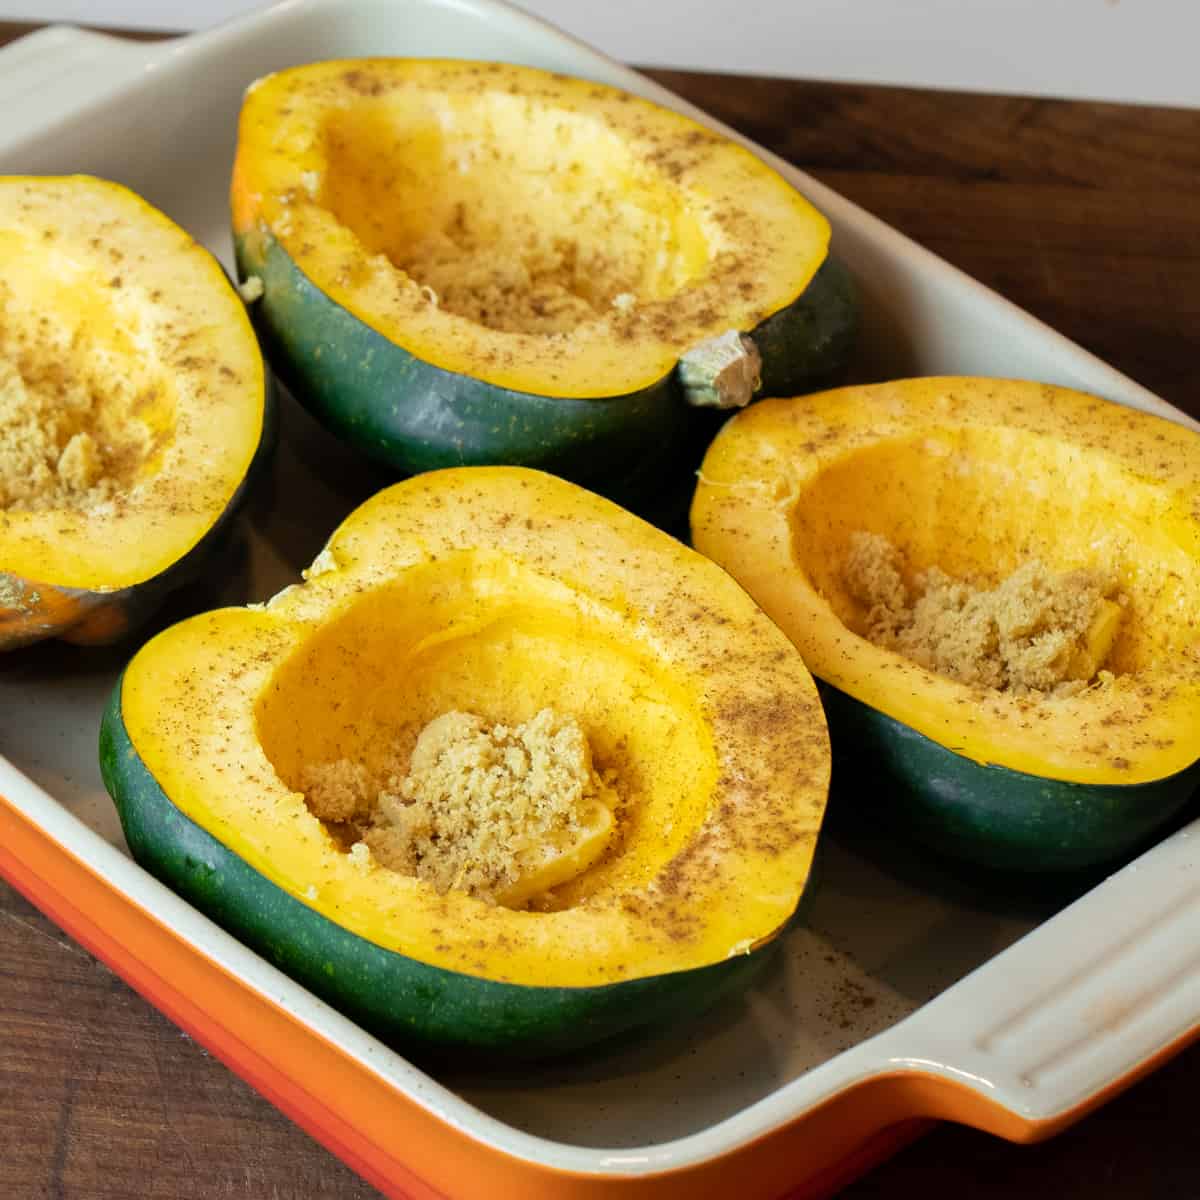 Butter, brown sugar and cinnamon in the hollowed out portion of an acorn squash.